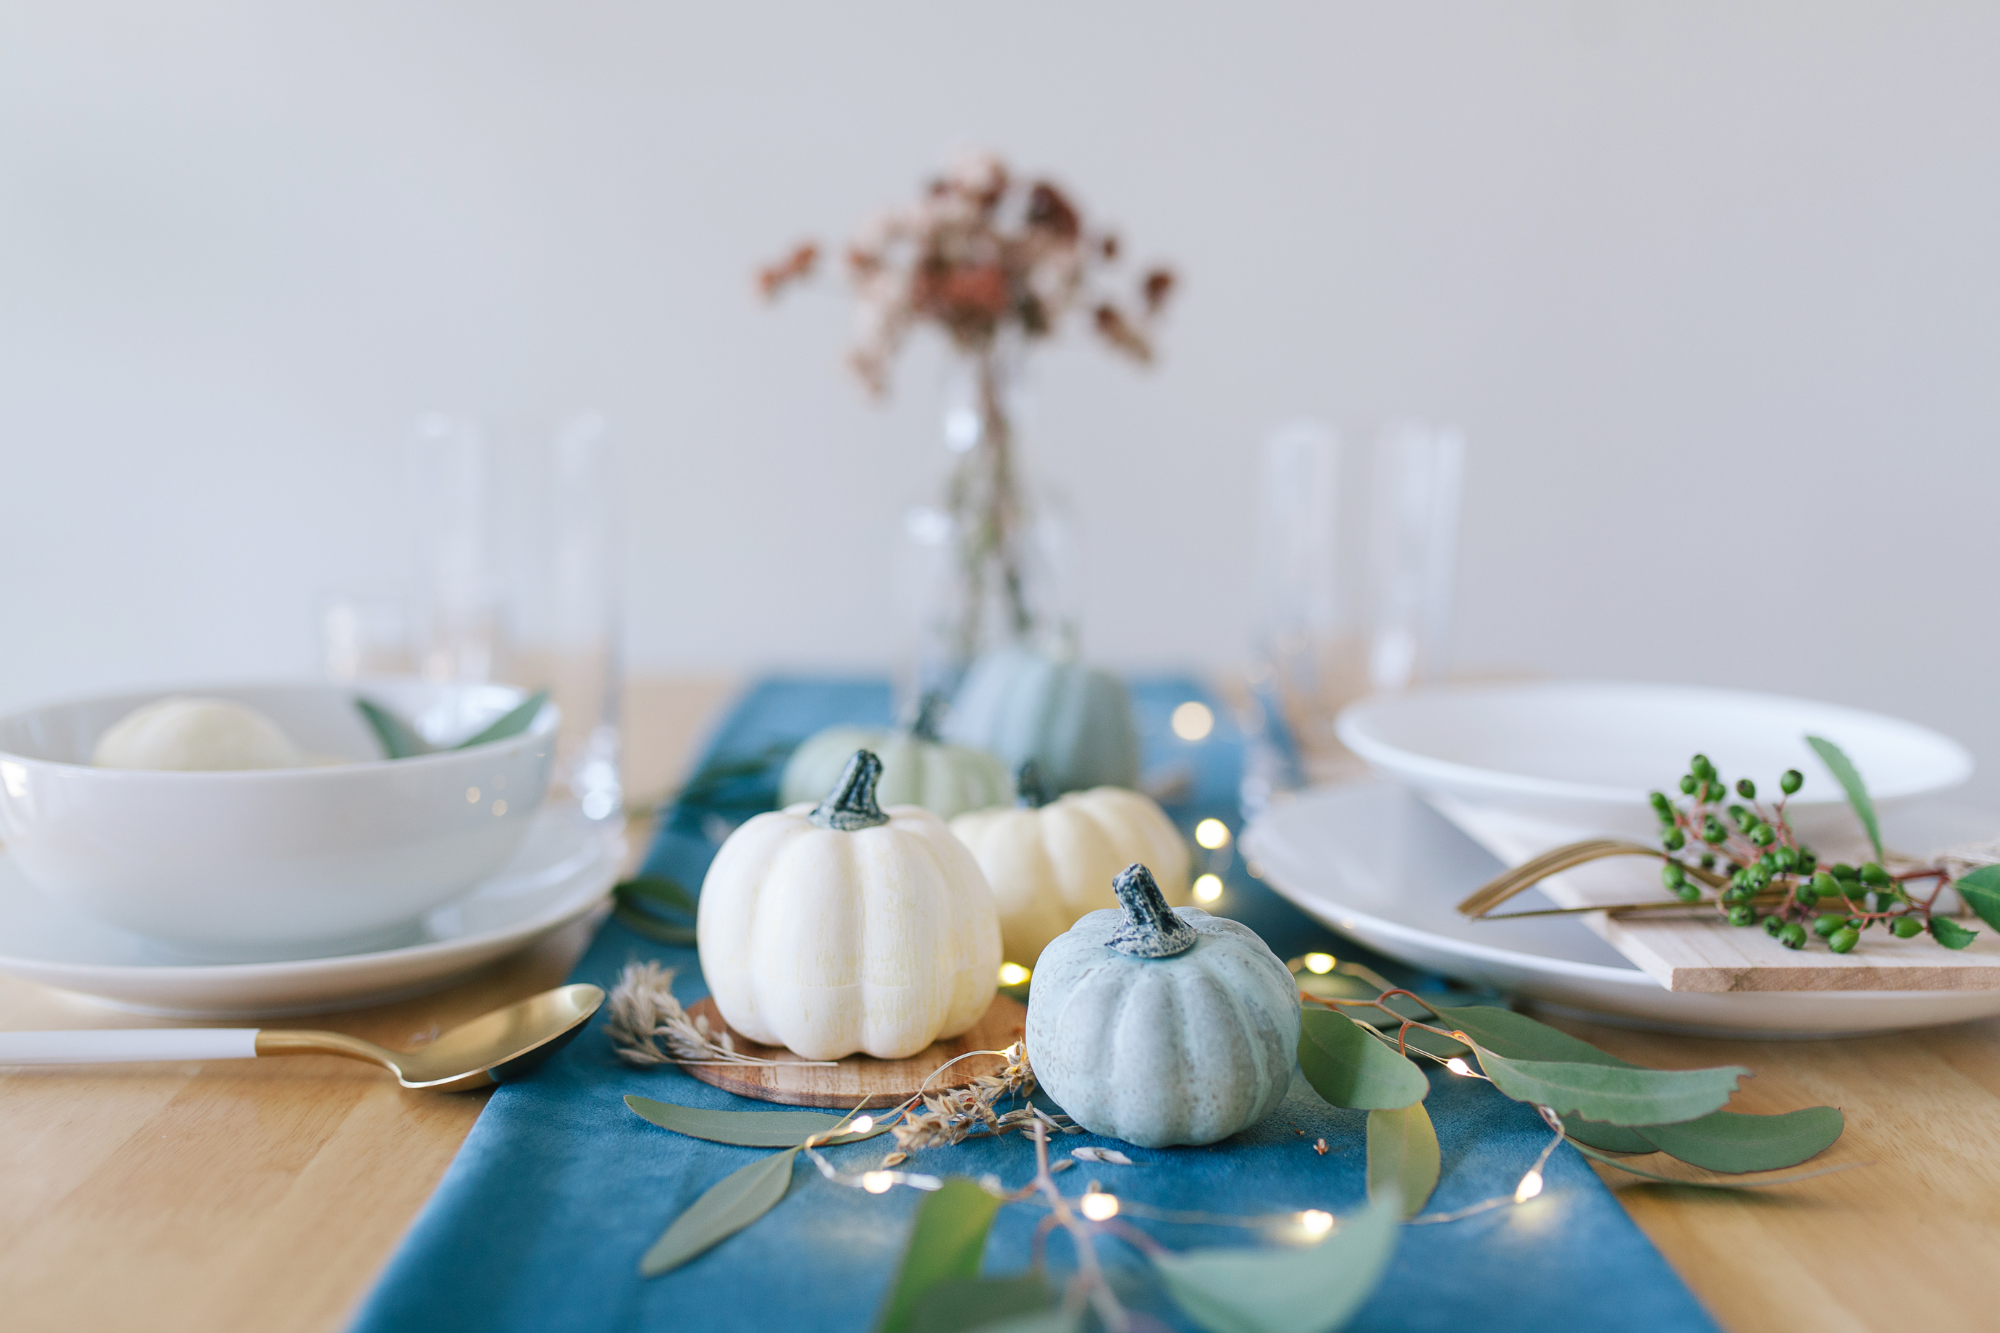 Holiday table set with white plates, a blue runner, white and blue pumpkins, and flowers. 21 Tips To Survive Divorce And The Holidays.